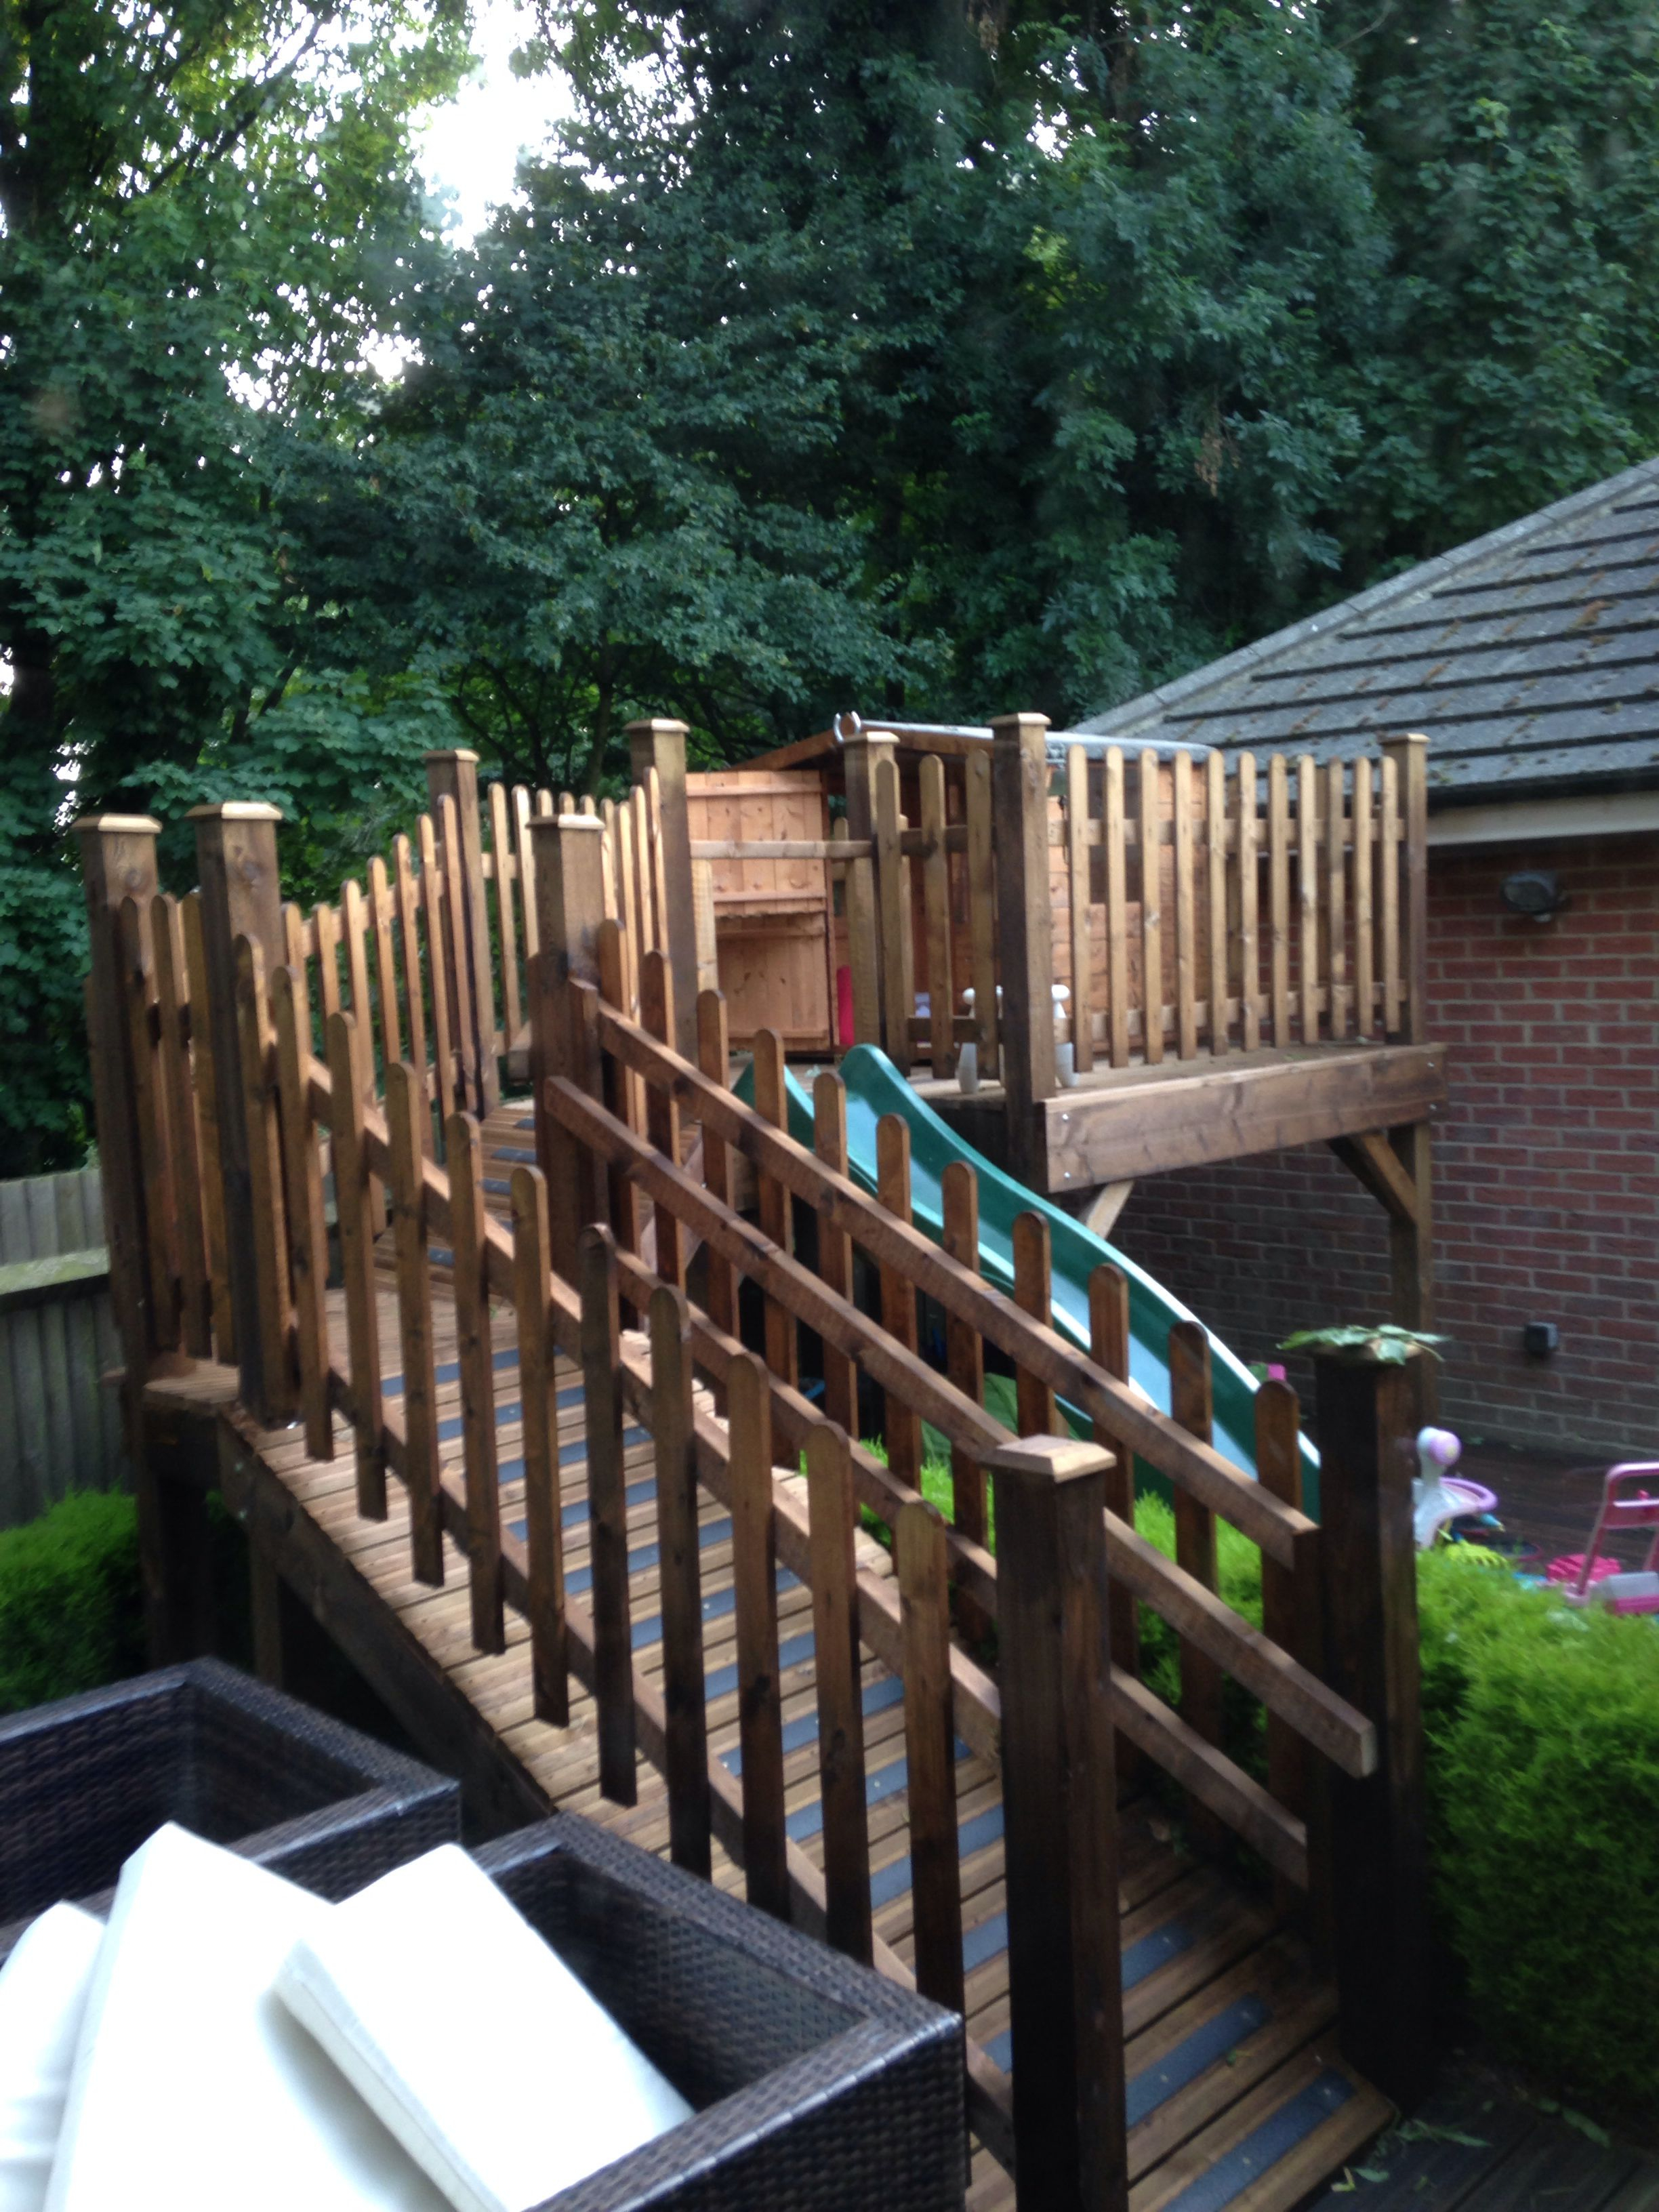 Raised Play Area Two Tier Slope Up To Platform Decking With throughout dimensions 2448 X 3264